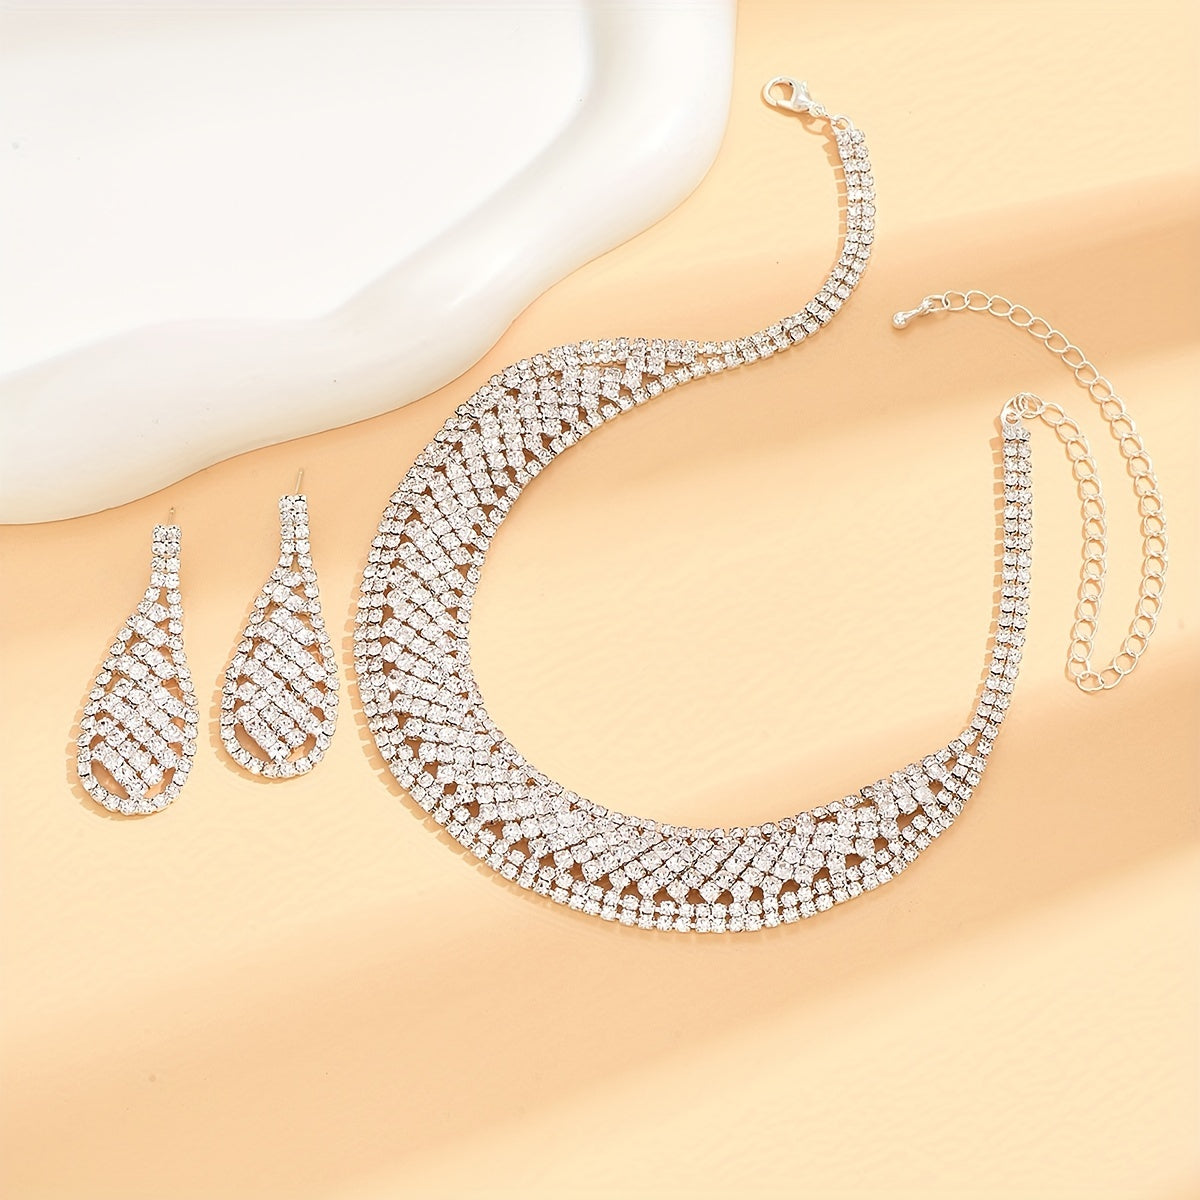 Sparkling Rhinestone Necklace and Earrings Set for Glamorous Occasions